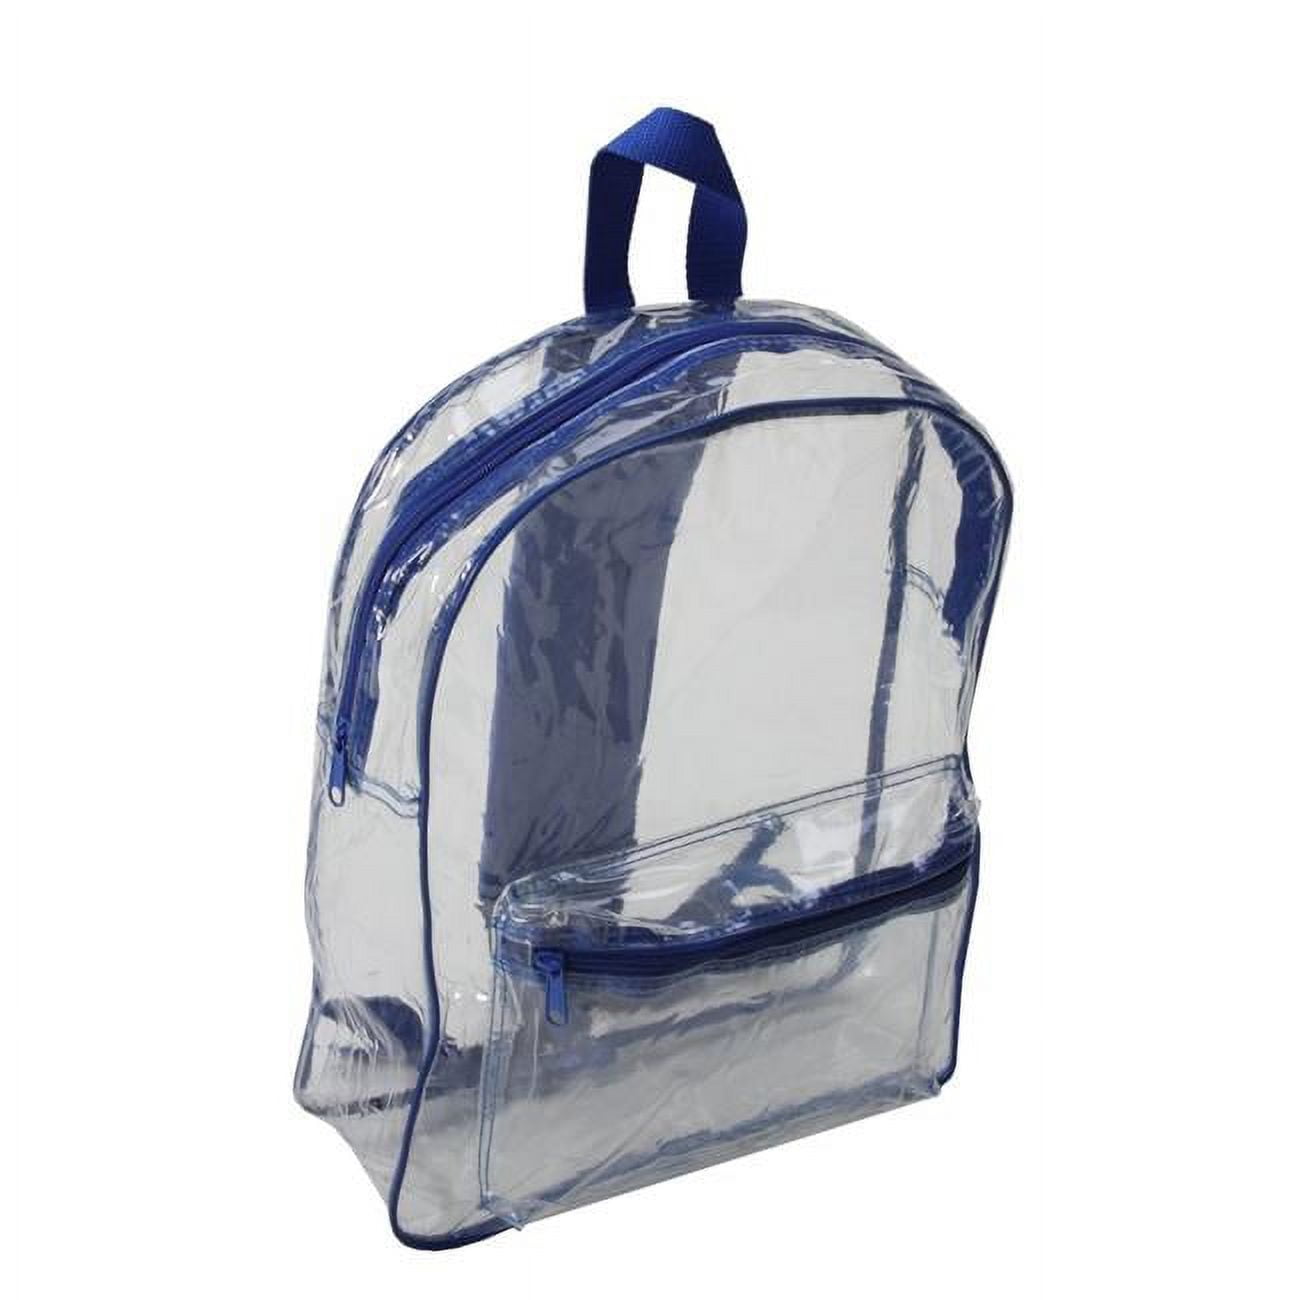 Clear Security Backpack, Royal Blue - Case Of 50